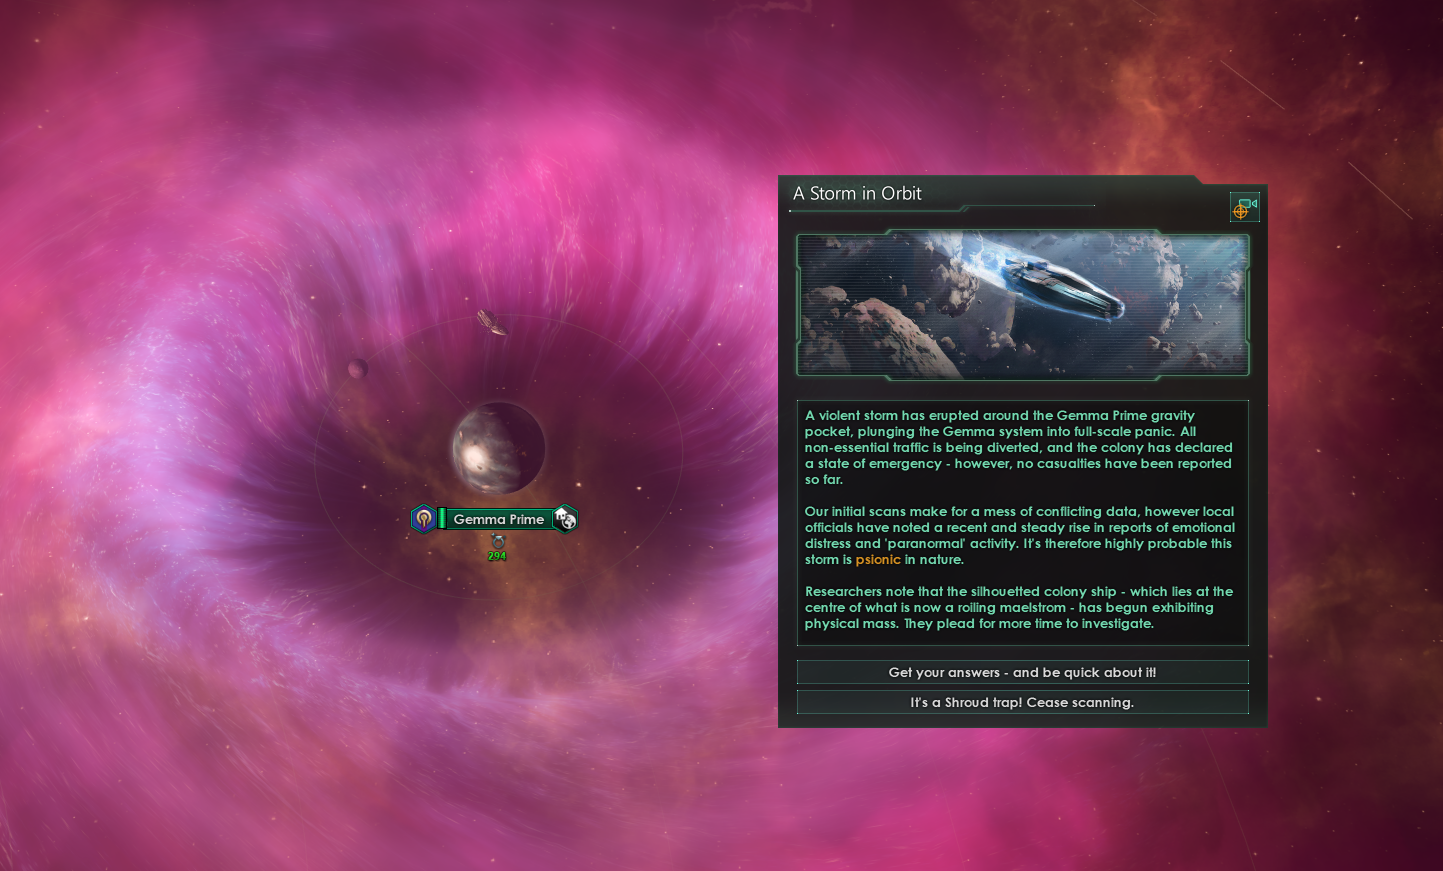 A violent pink haze surrounds the gravity well of an ocean world named Gemma Prime. An event entitled 'A Storm in Orbit' describes a state of emergency, and signs that this disturbance is psionic in nature. The player is given options to investigate the silhouette of a stricken colony ship — with haste — or else ignore the Shroud at this time.